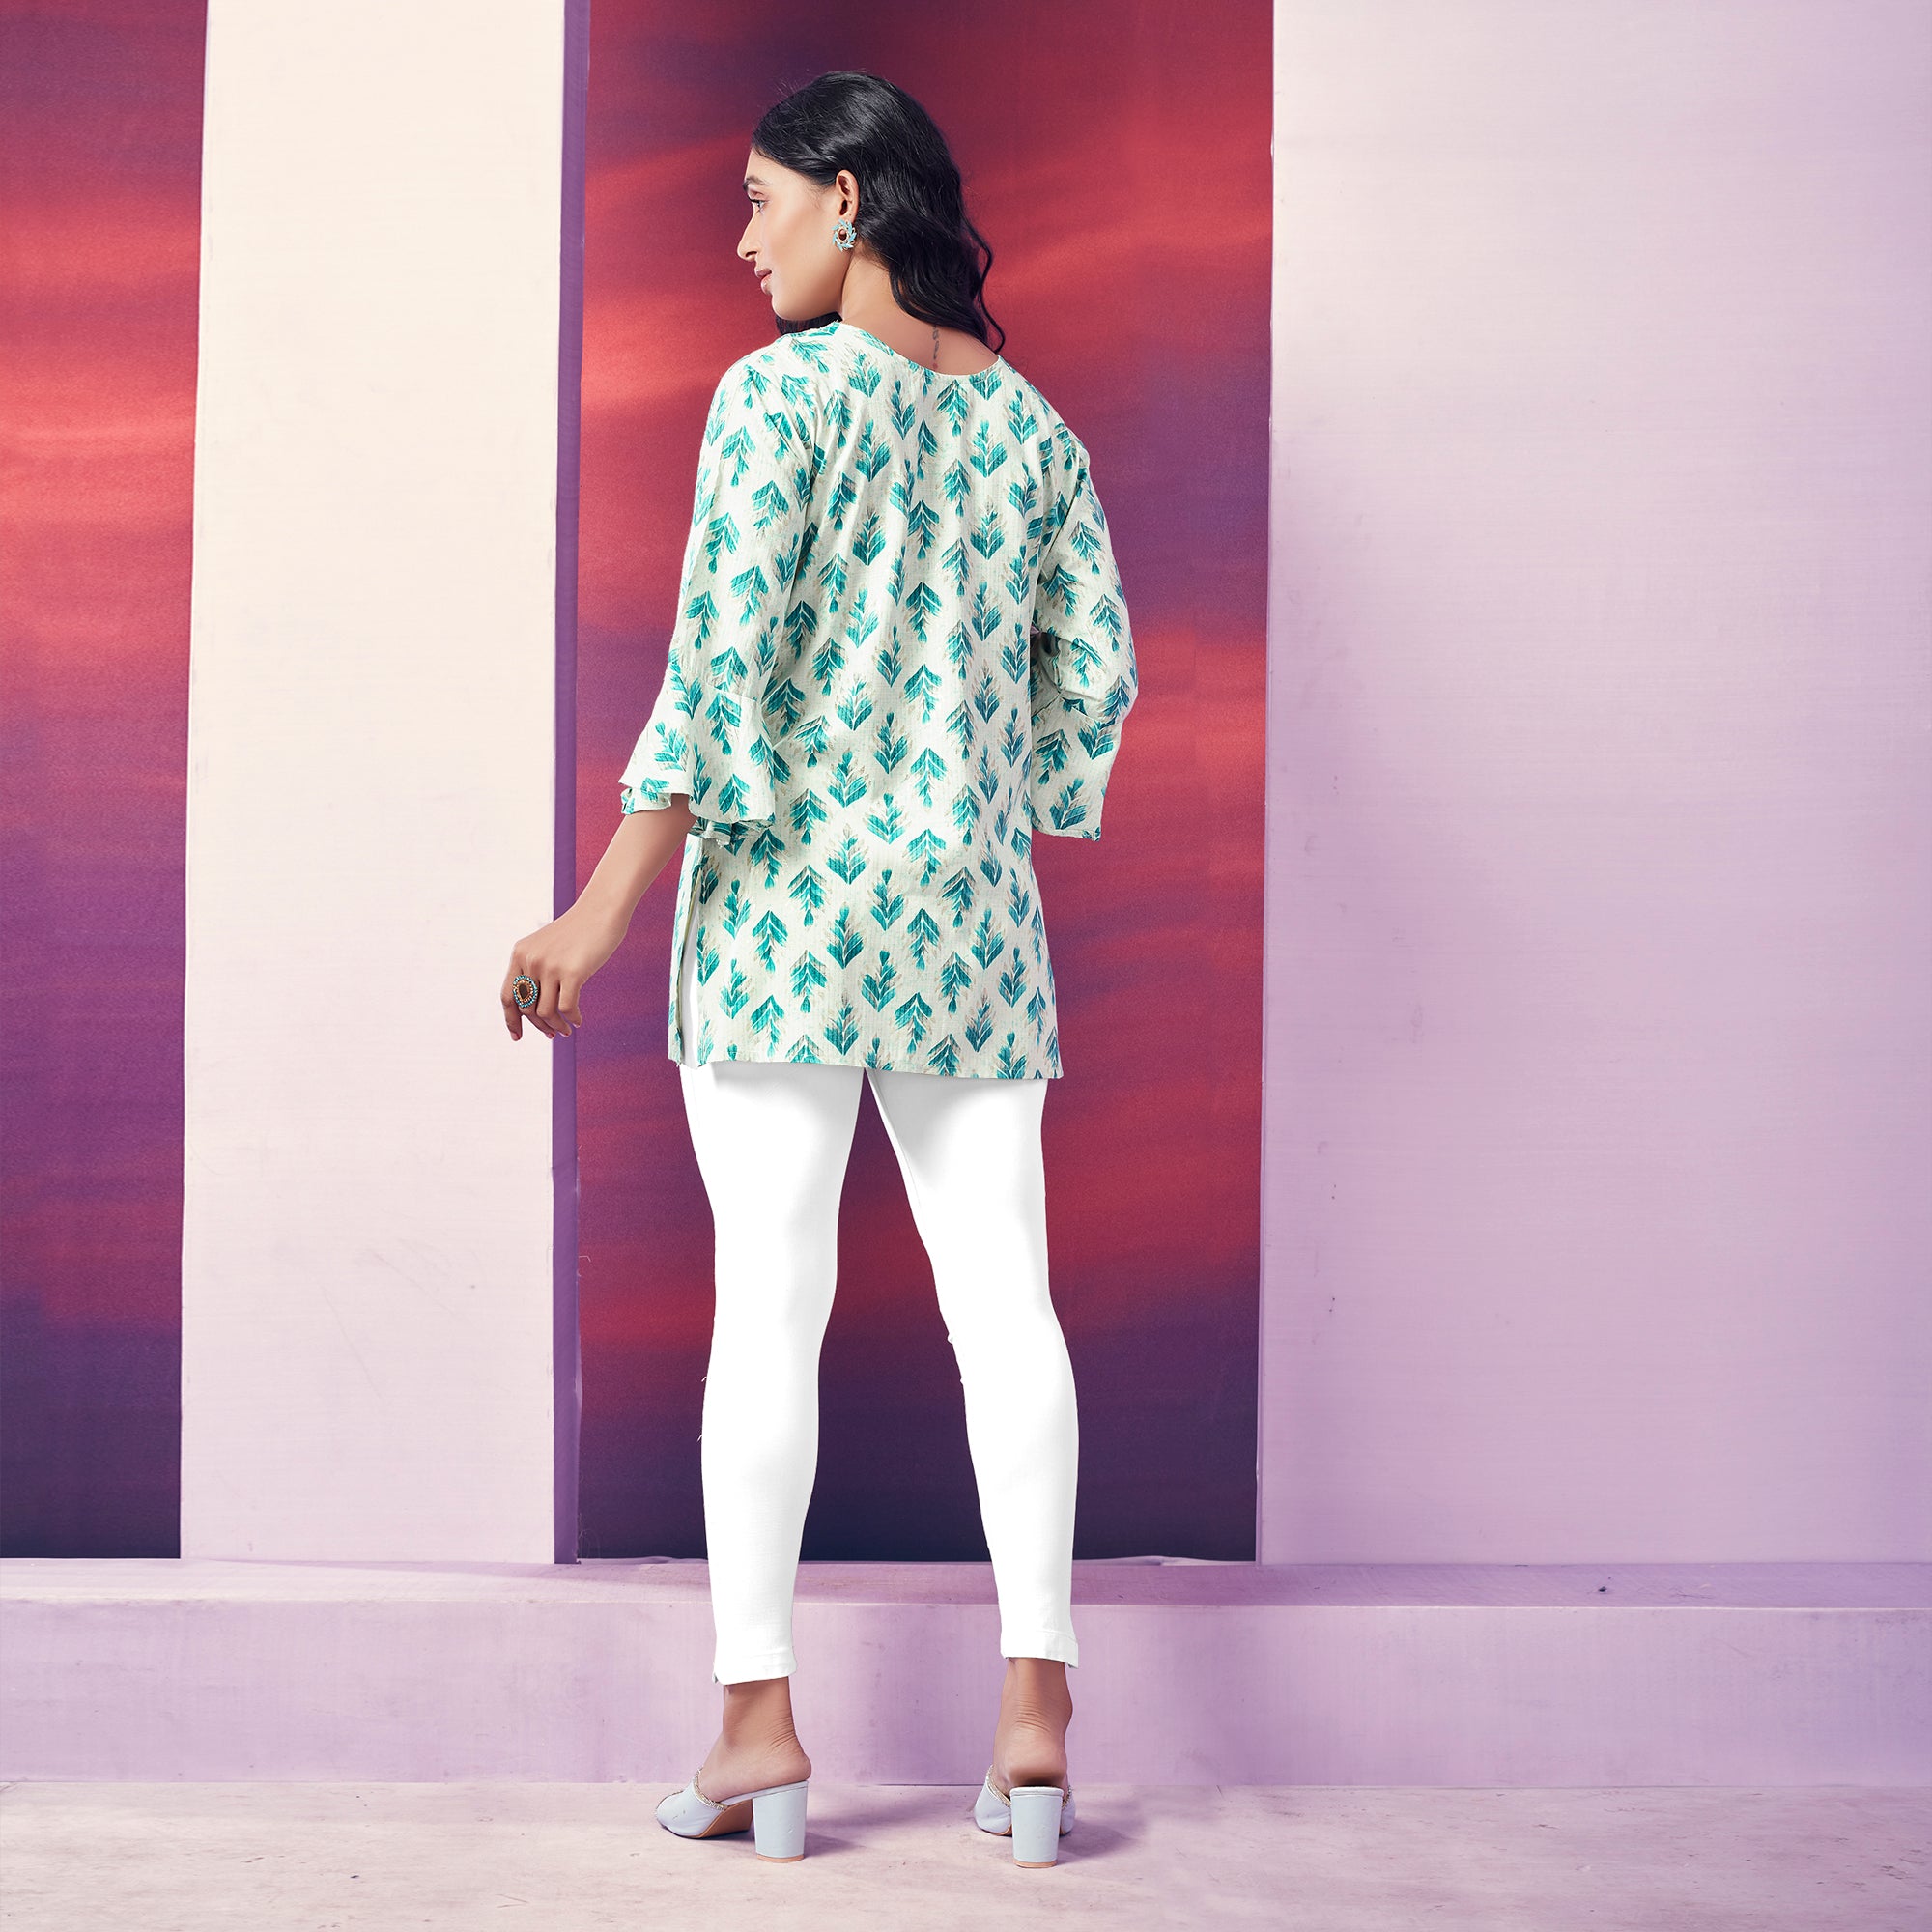 White & Turquoise Floral Foil Printed Rayon Top